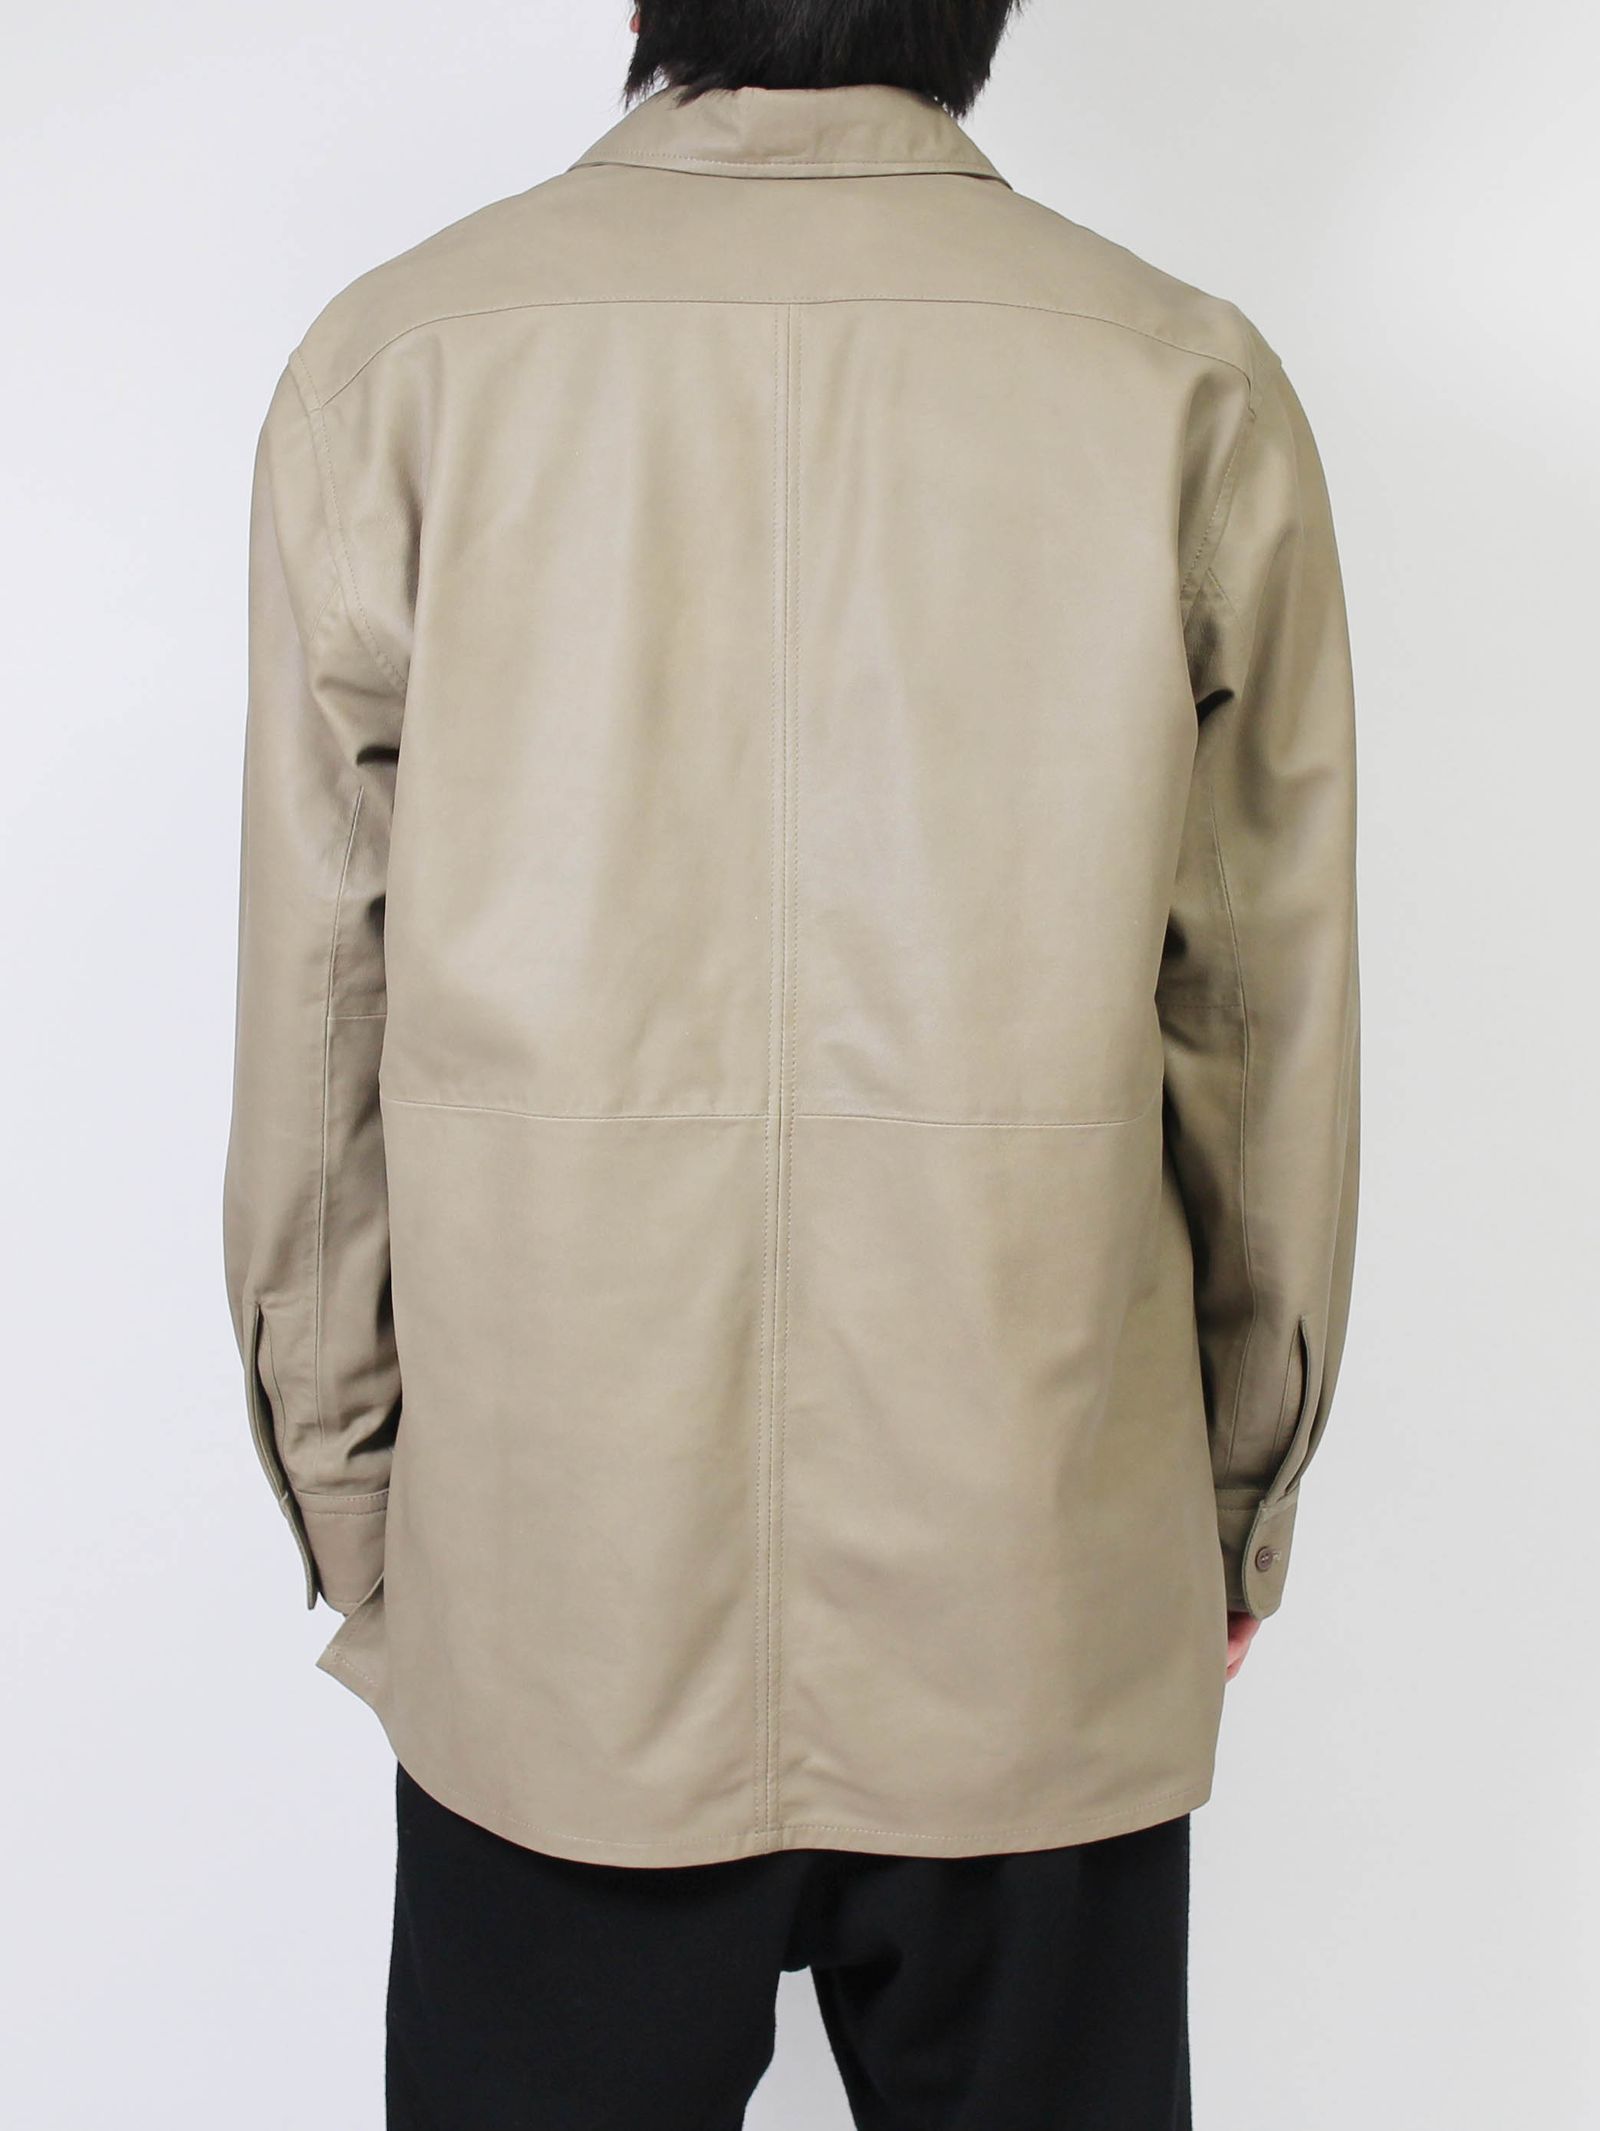 SEVEN BY SEVEN - LETHAER PULLOVER SHIRTS - Goat leather - GREY